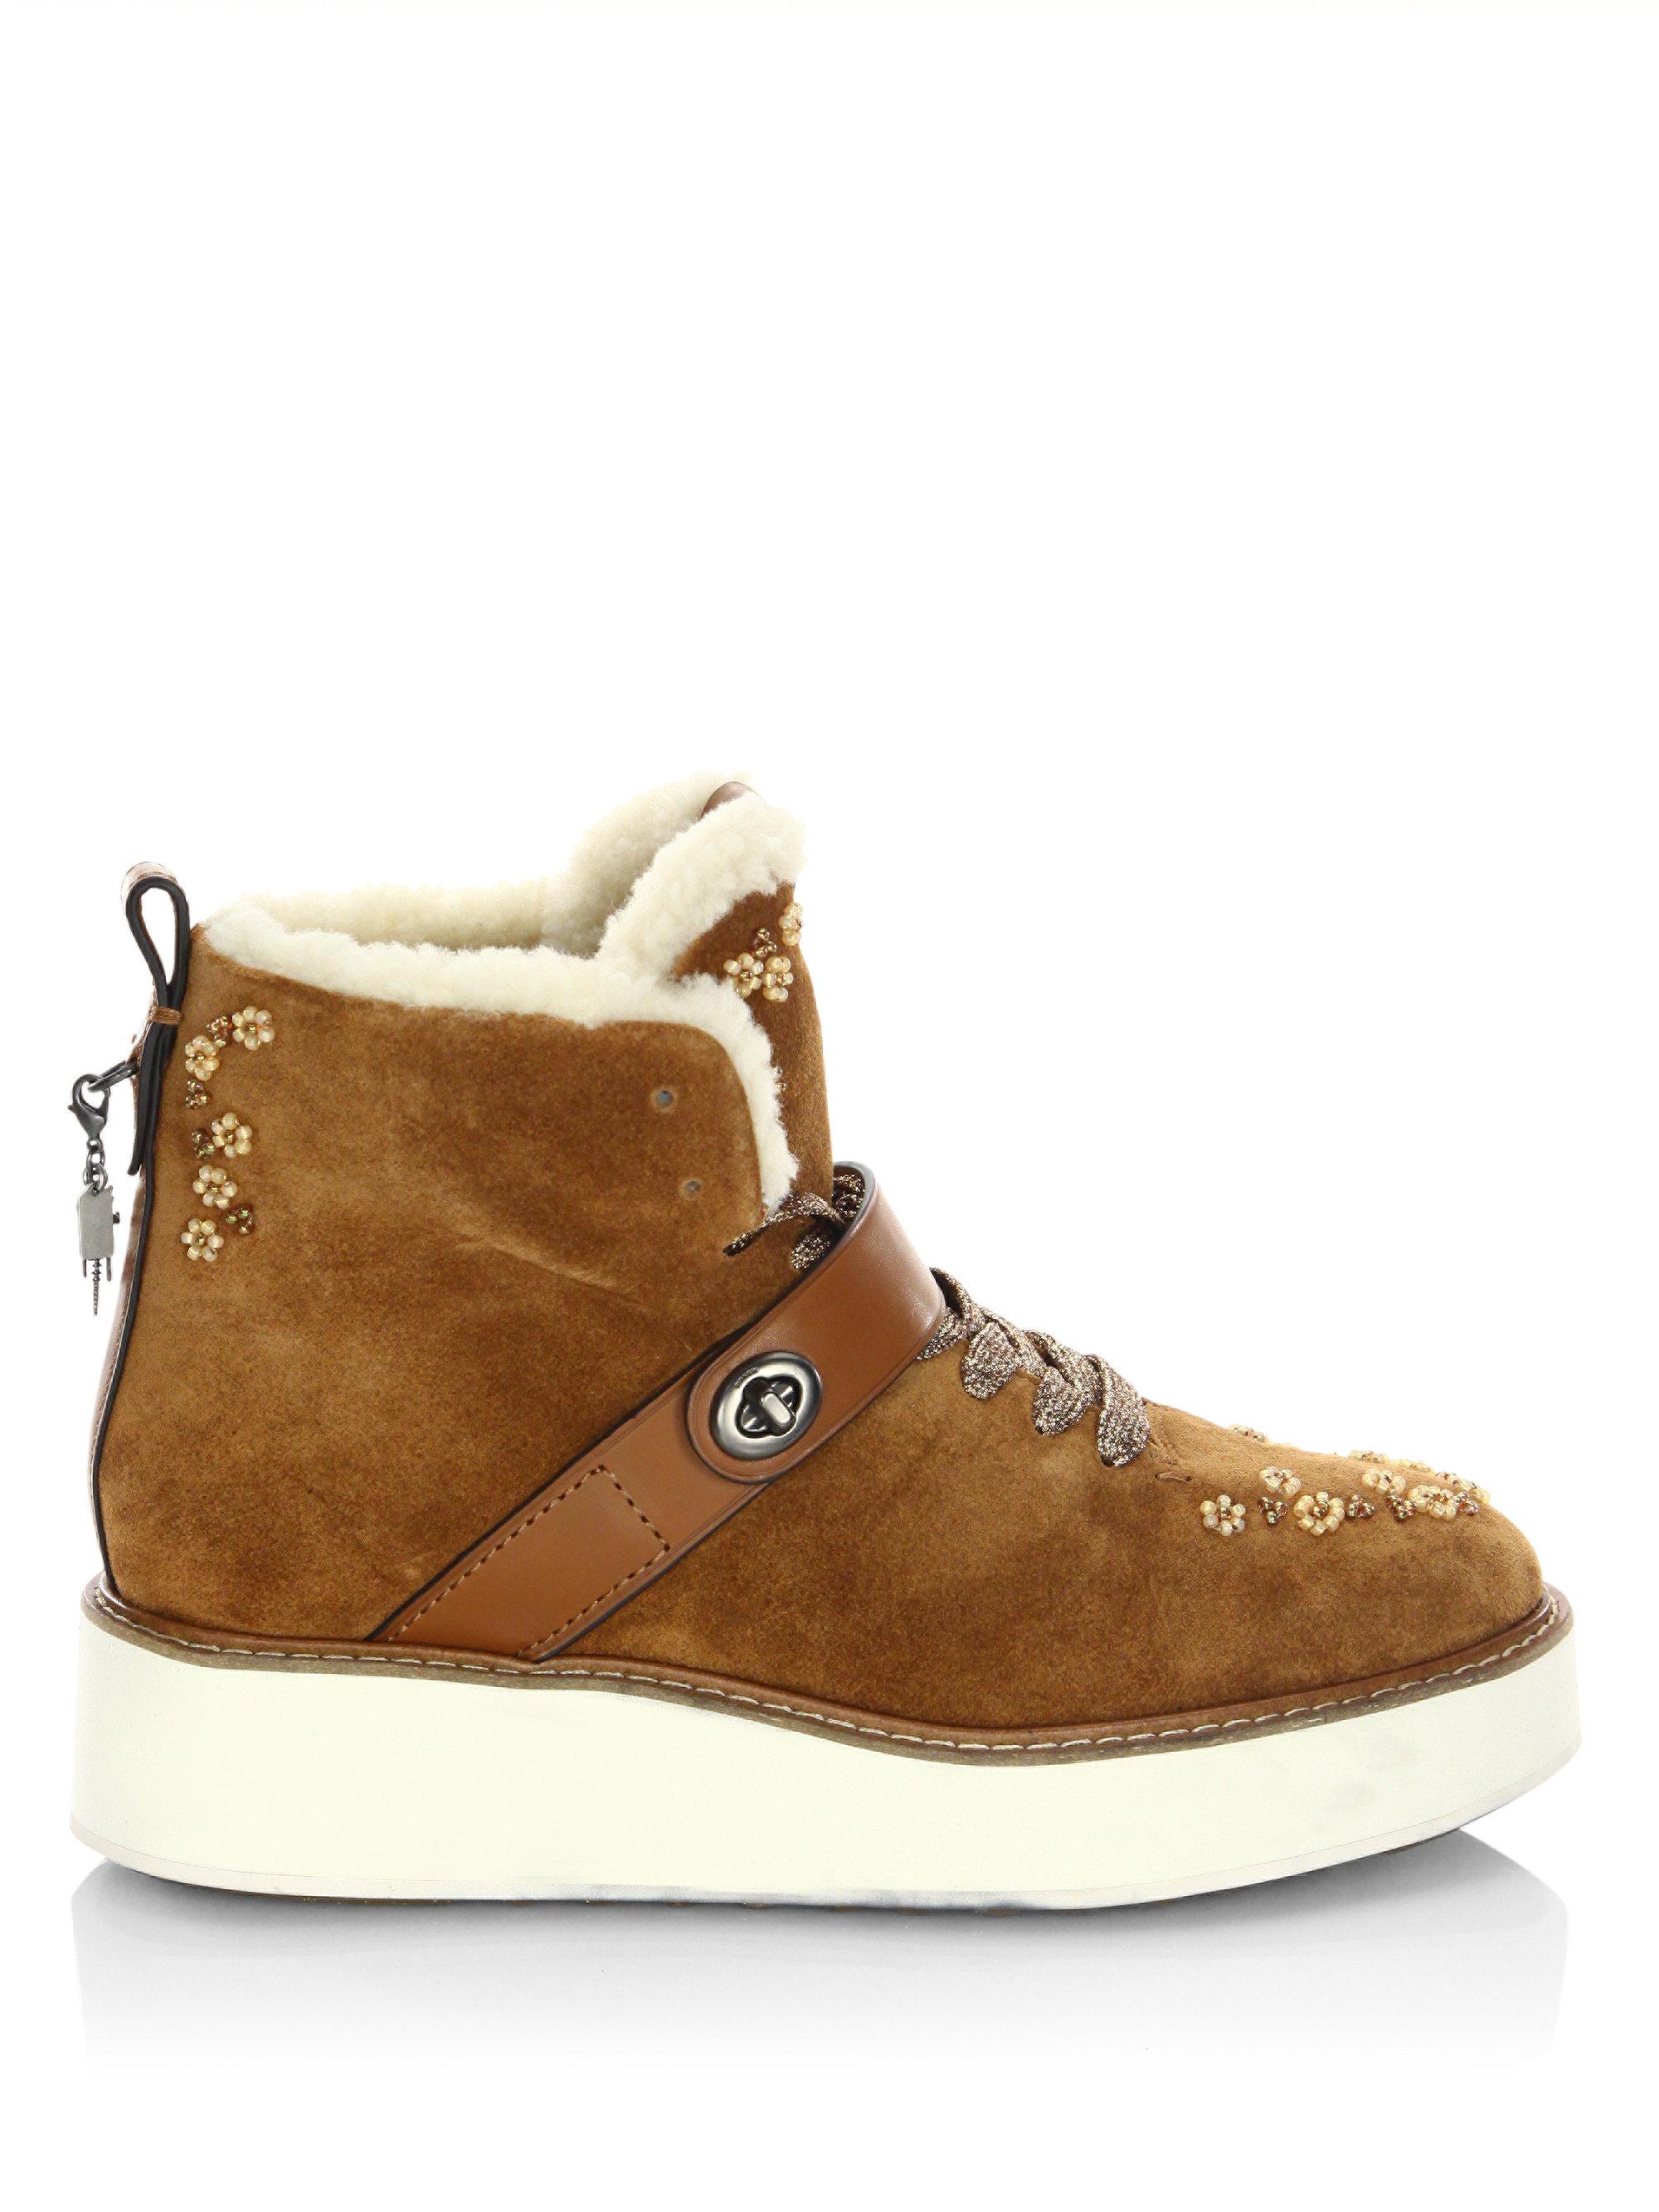 Lyst - Coach Urban Hiker Beads Shearling-lined Suede Wedge Boots in Brown